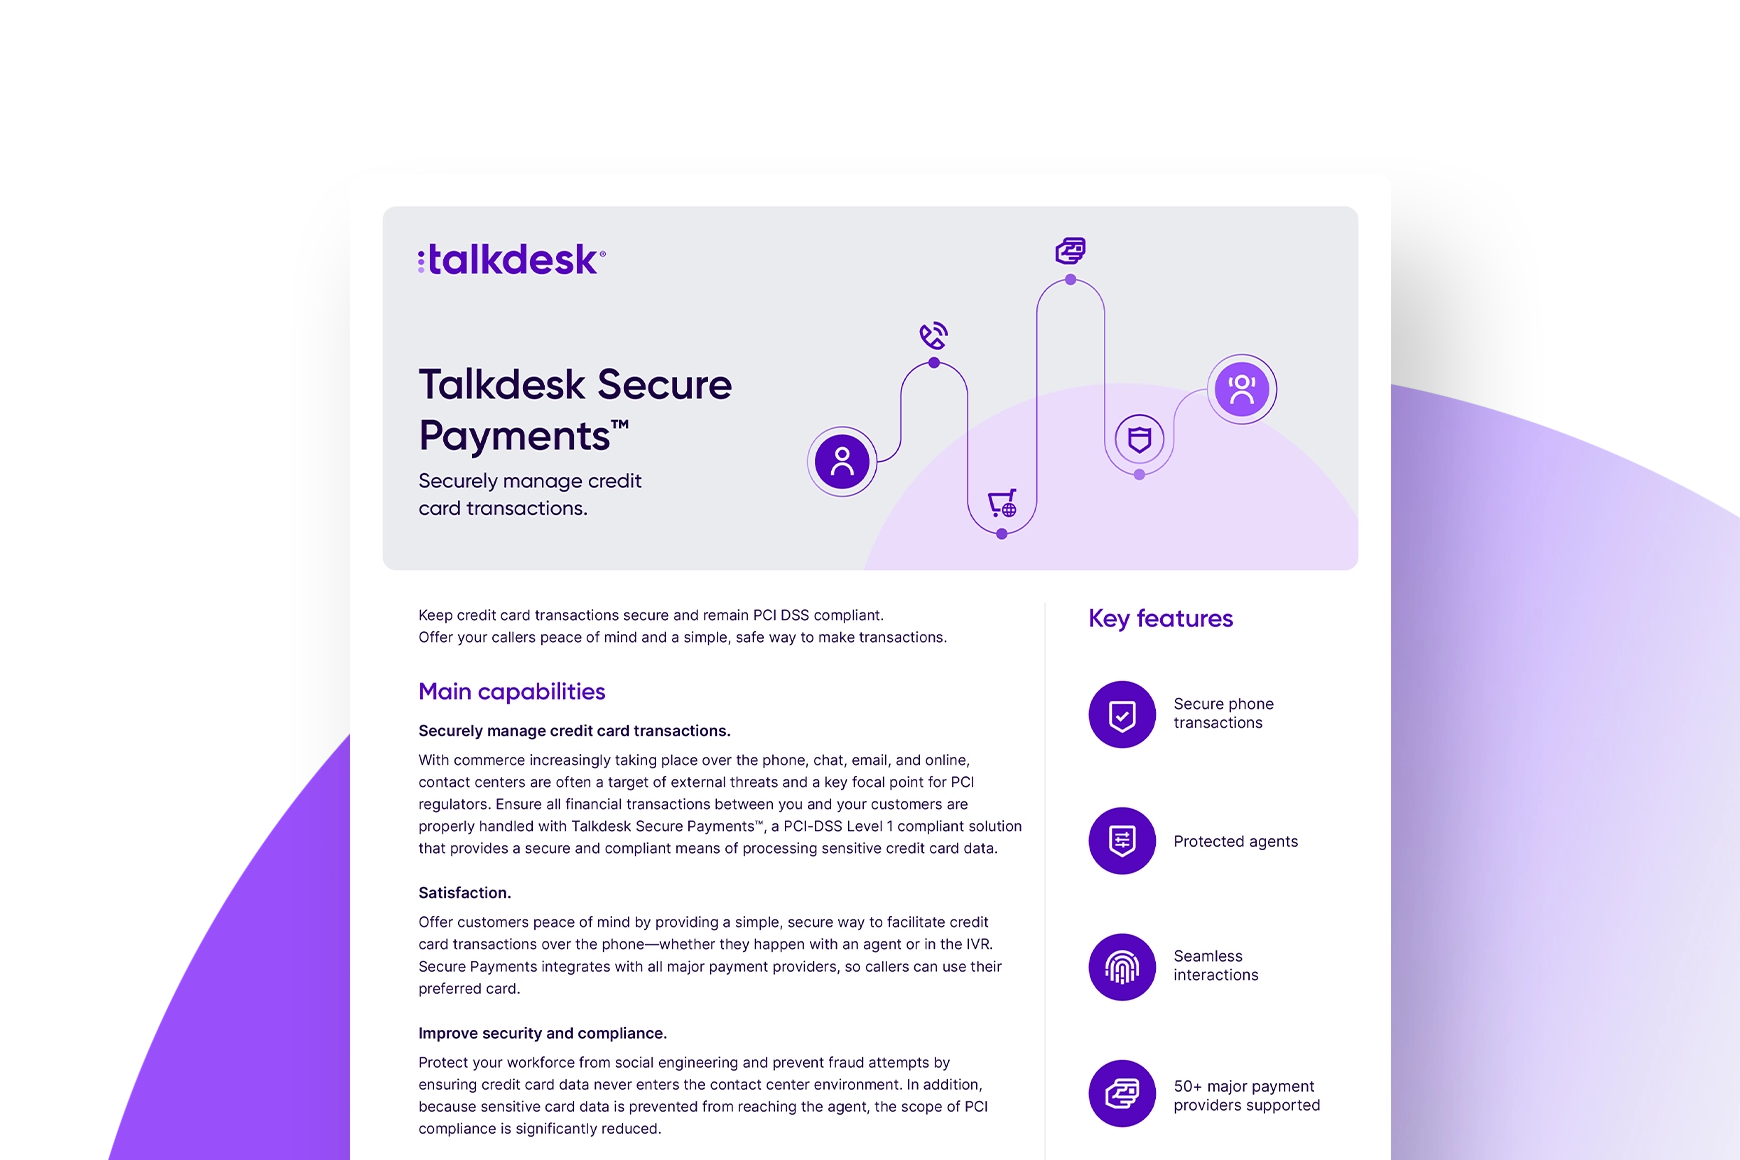 Talkdesk Secure Payments